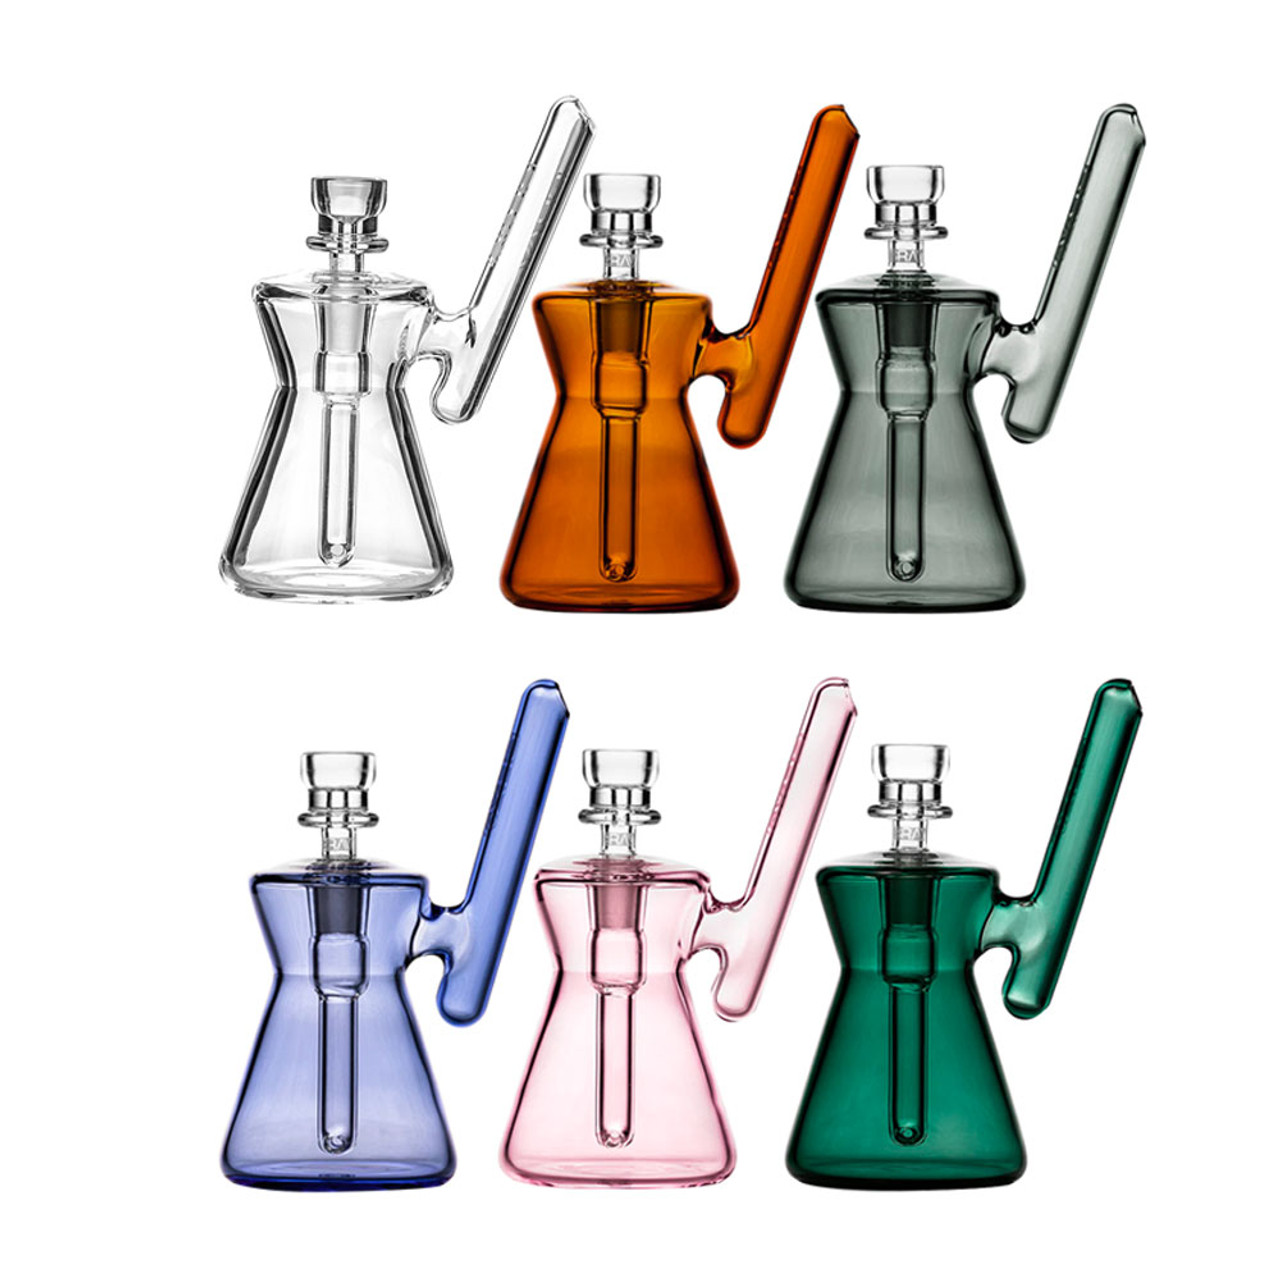 Wholesale Mini Water Pipe Bong Pocket Hookah 5 Tall, Ideal For